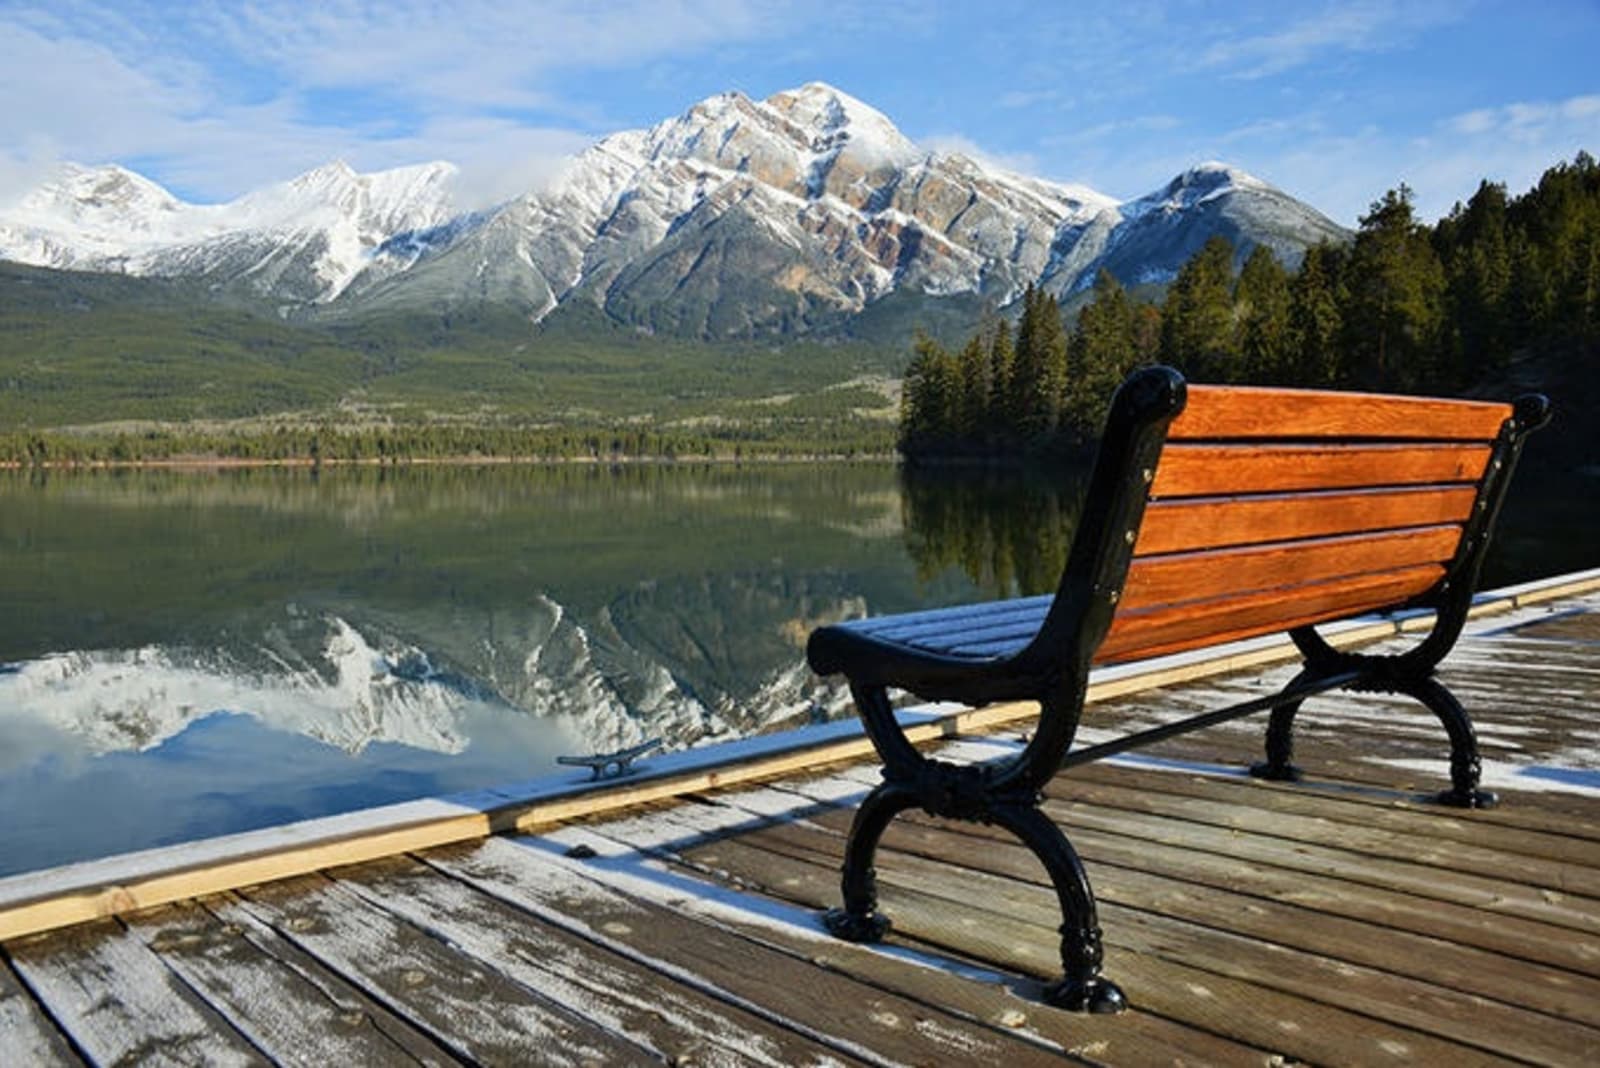 View-of-floating-pier-with-bench-and-reflection-of-Pyramid-mountain-in-Pyramid-Lake-in-Jasper-National-Park-Canada-UNESCO-World-Heritage-site-RS.jpg